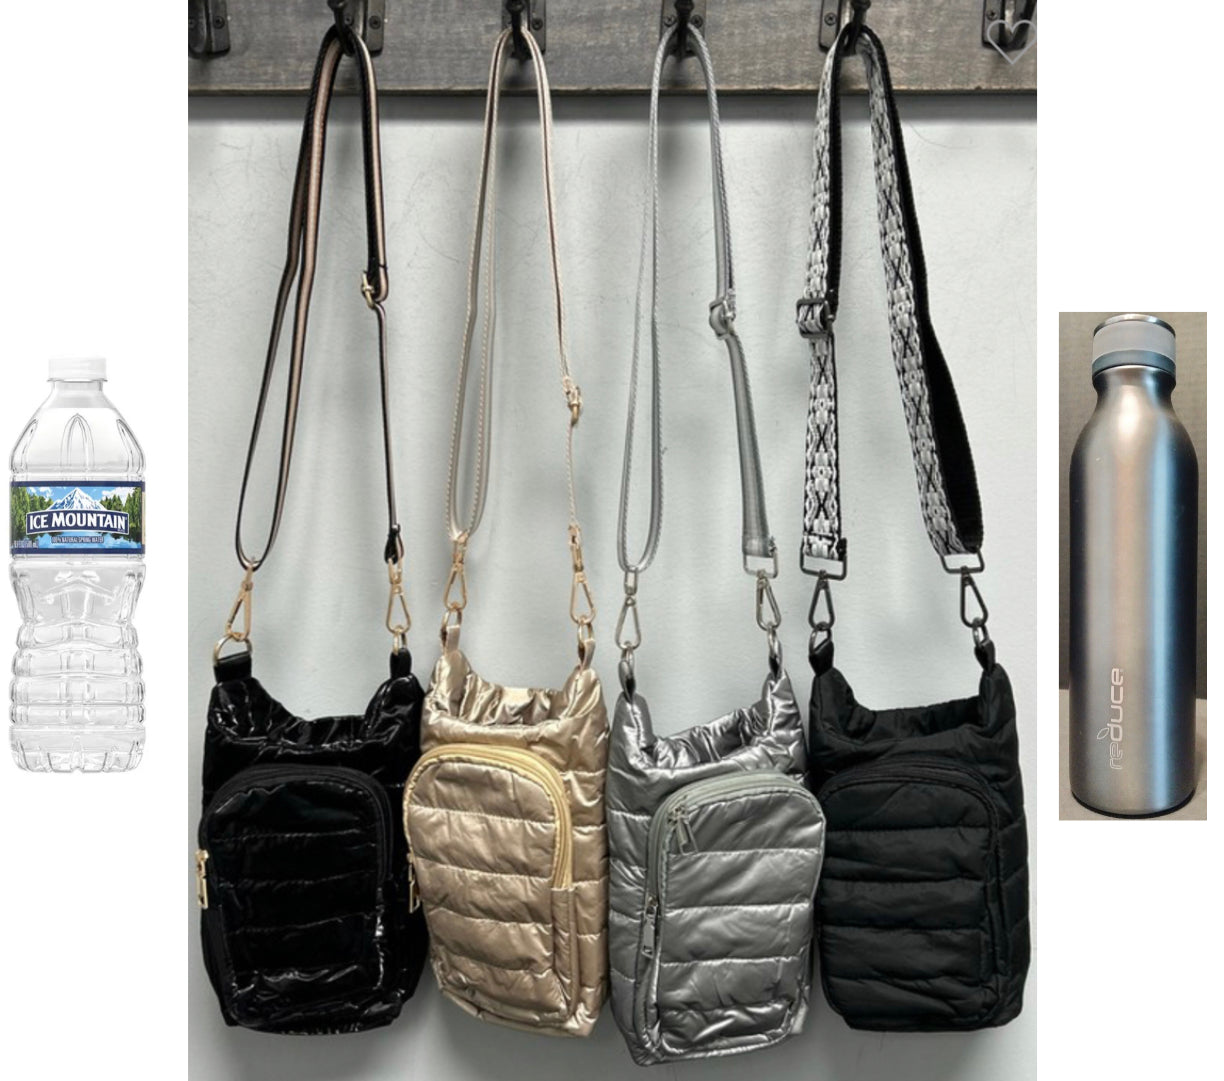 HOT ITEM, water bottle crossbody bag...great for gifts, travel, walks and more!